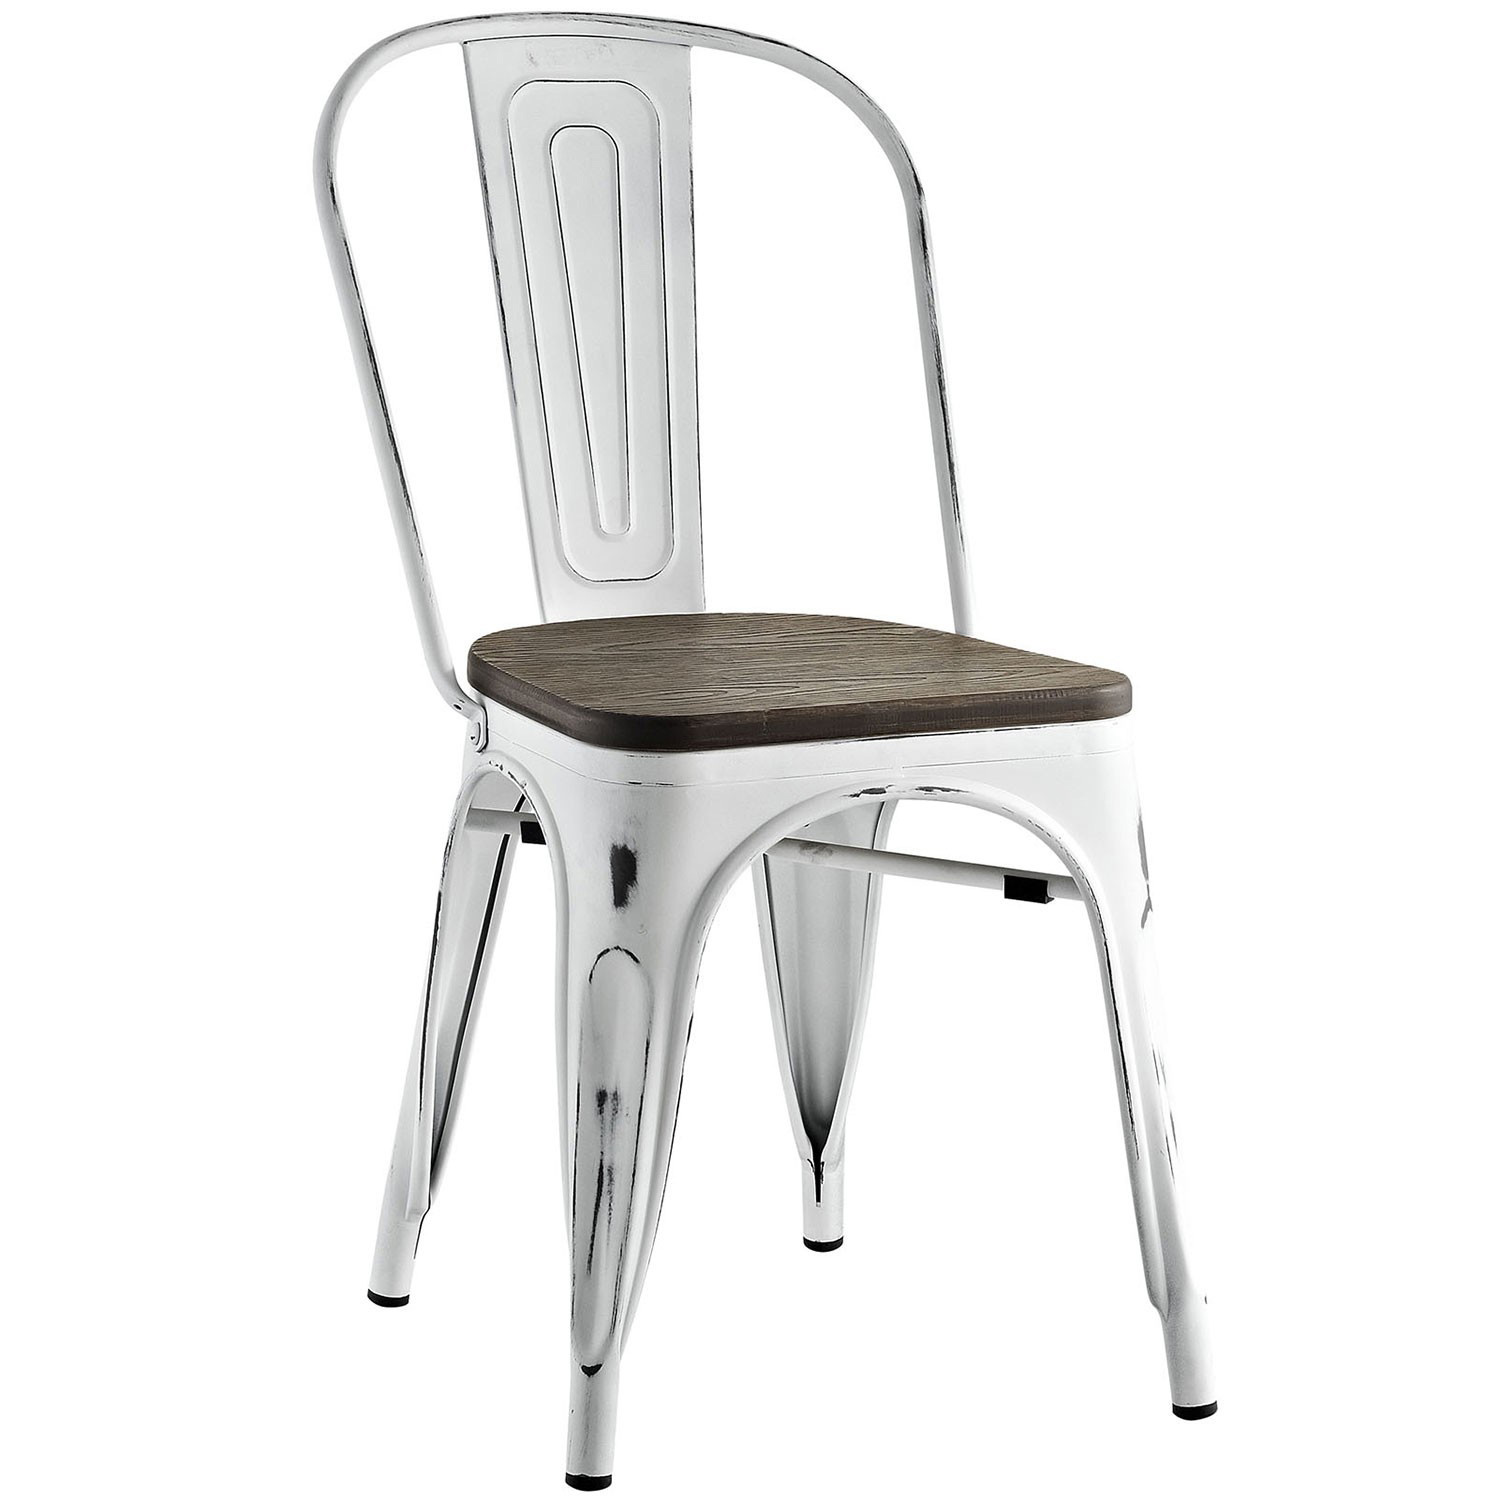 Modway Promenade Bamboo Side Chair - White